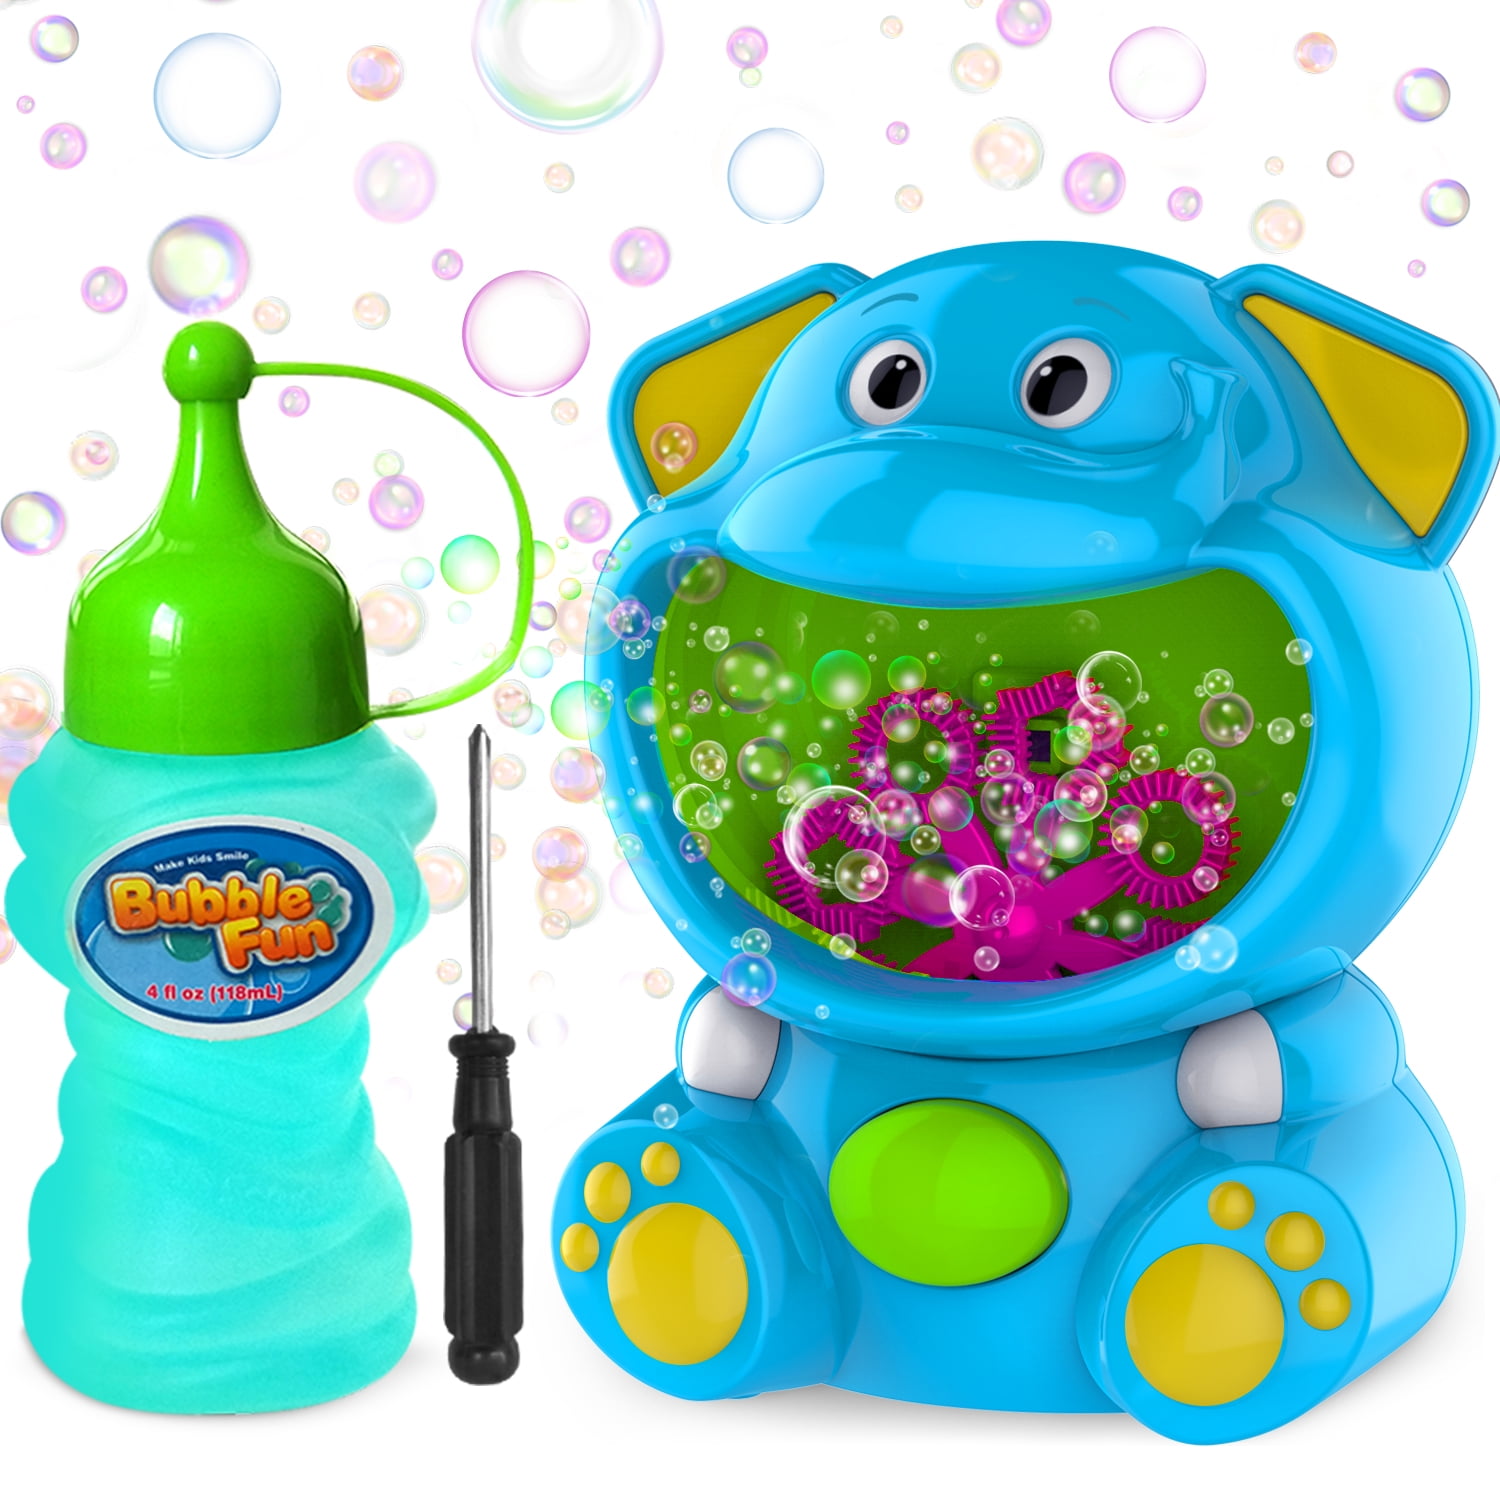 Simple and Easy to Use Green Handheld Electric Bubble Wand Machine with Fan Automatic Blower for Boys and Girls Kids Toddlers,Party Wedding,Outdoor Activity Game 